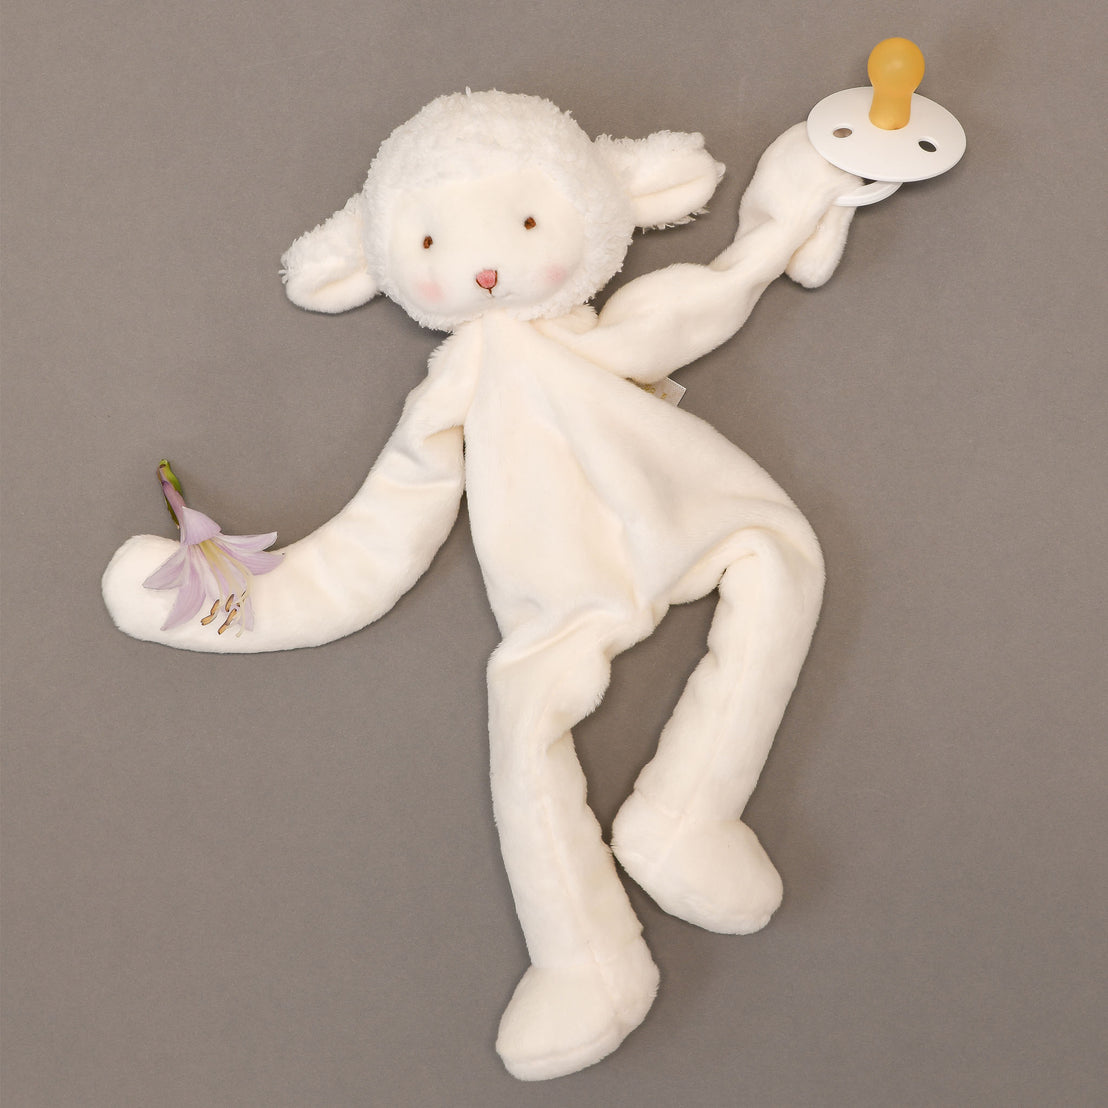 A Silly Lamb Buddy plush toy with a white fleece and limbs designed for an upscale baptism, lying on a grey background alongside a pacifier and a small purple flower.